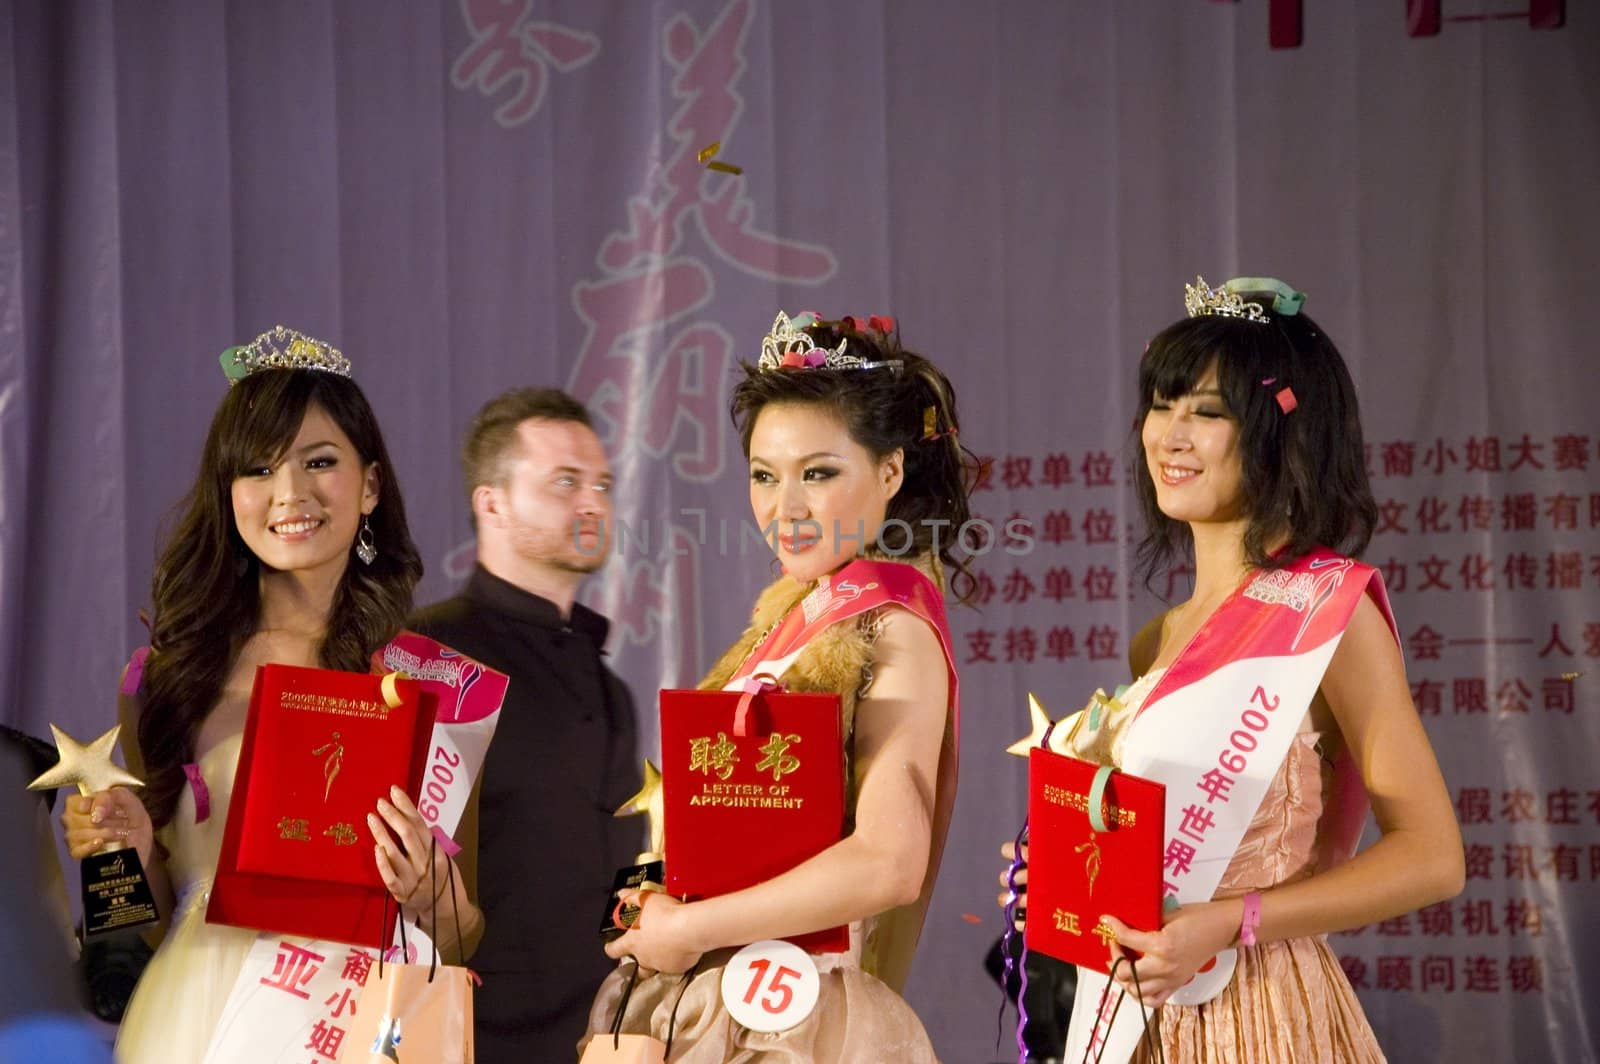 CHINA, SHENZHEN - DECEMBER 6: regional competition for Miss Asia, pageant on December 6, 2009 in Shenzhen, China.